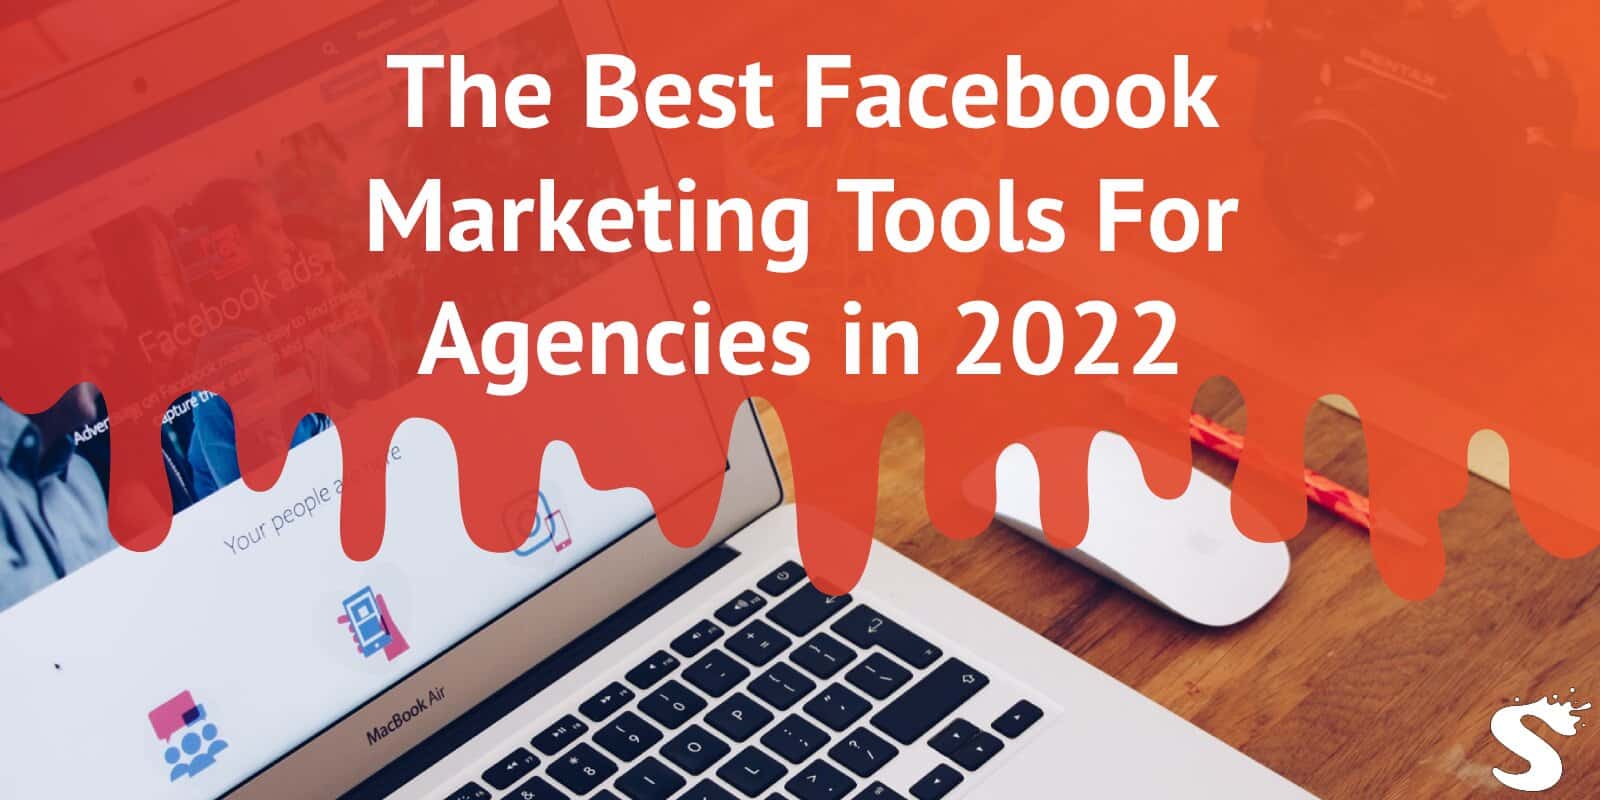 The Best Facebook Marketing Tools For Agencies in 2022